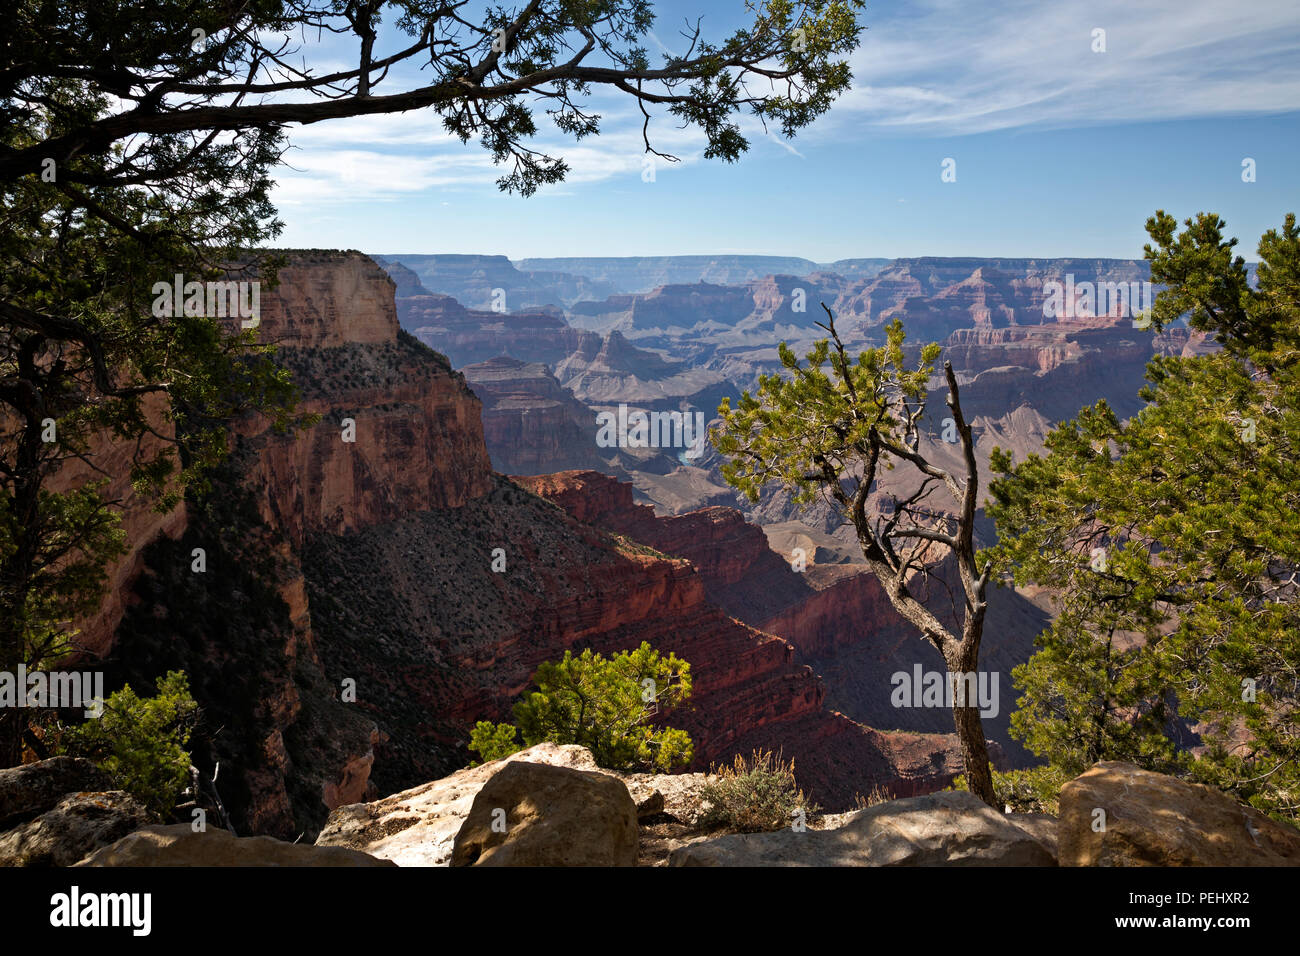 AZ00268-00...ARIZONA - View of the Colorado River from the canyon rim trail near Monument Creek Vista,  located along the Hermit Road in Grand Canyon  Stock Photo